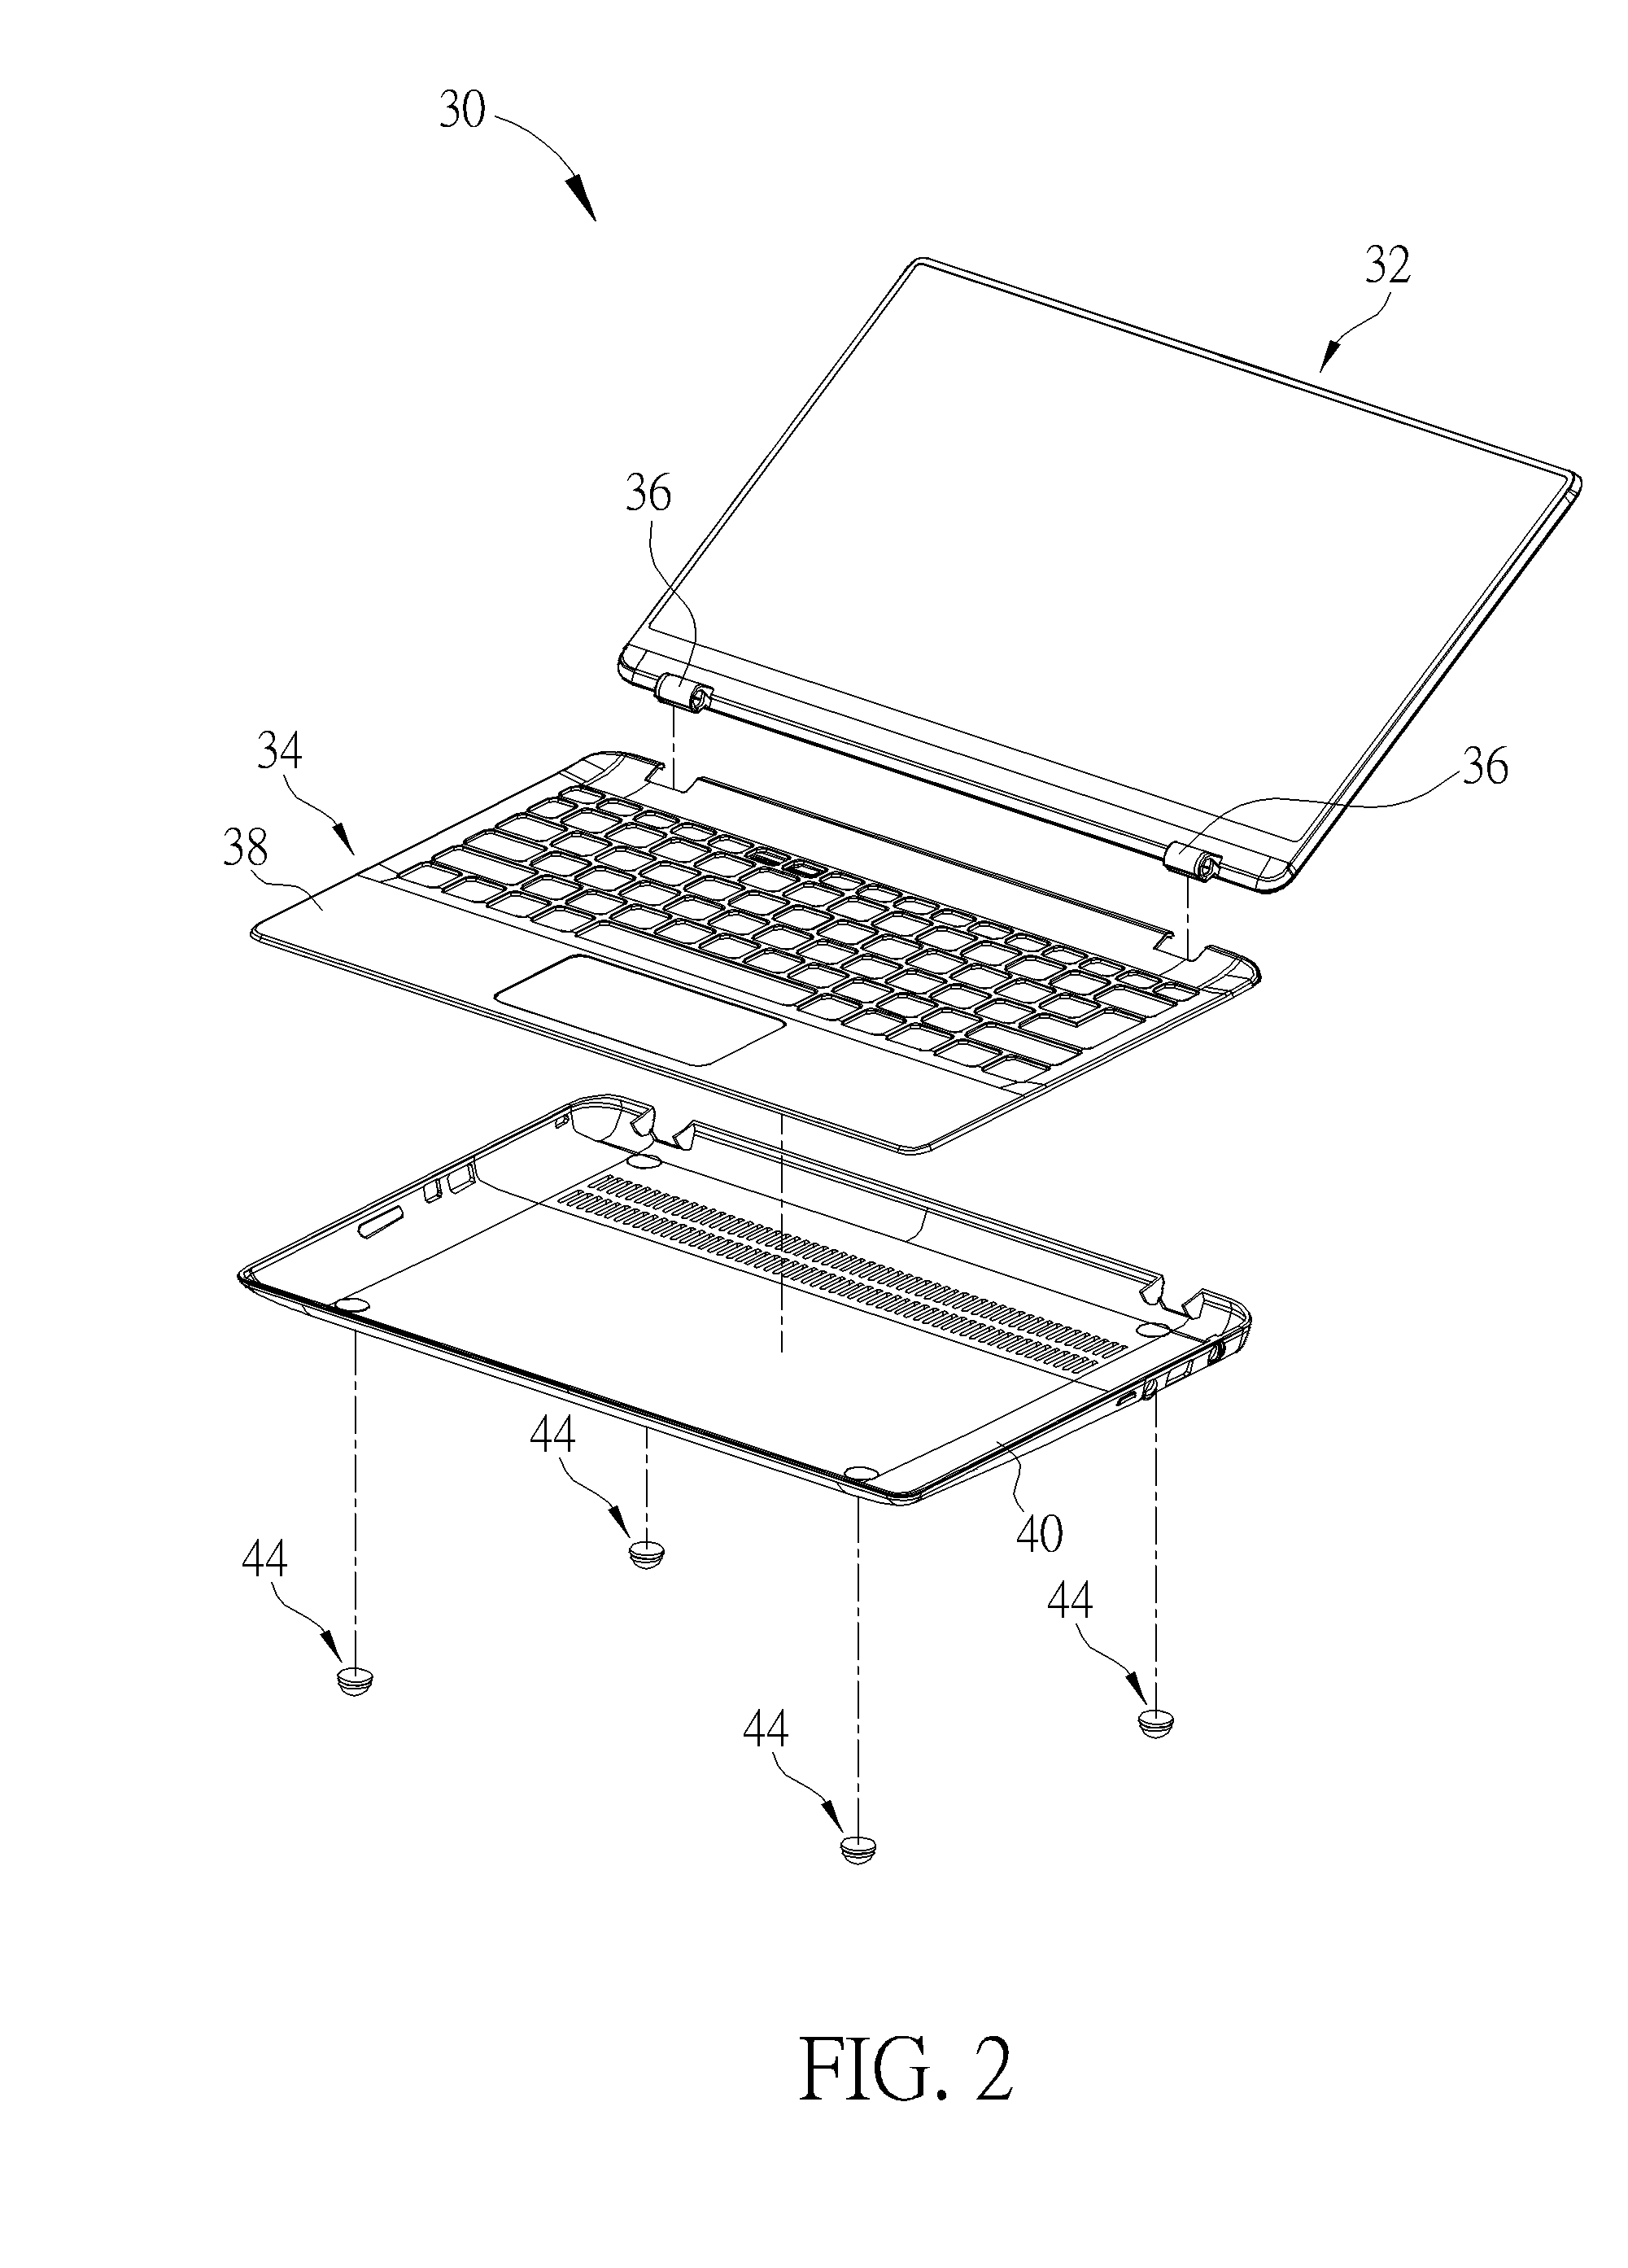 Foot cushion mechanism and electronic device therewith